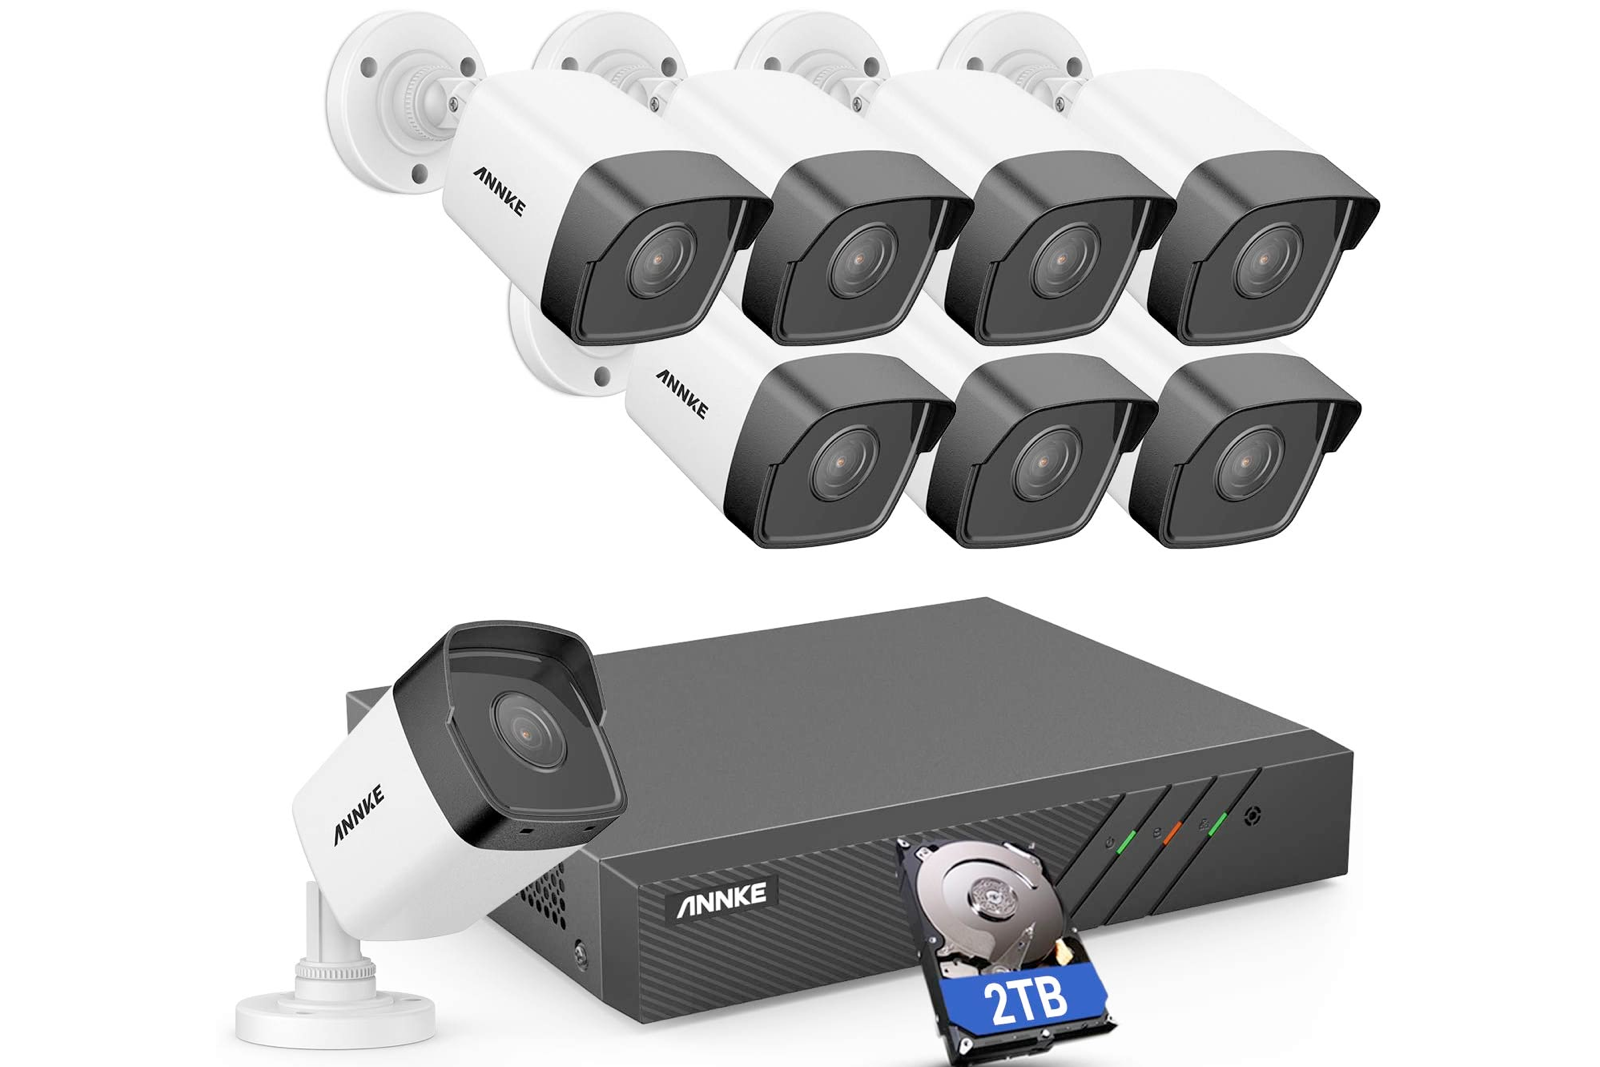 Annke home security deals for Prime Day photo 15